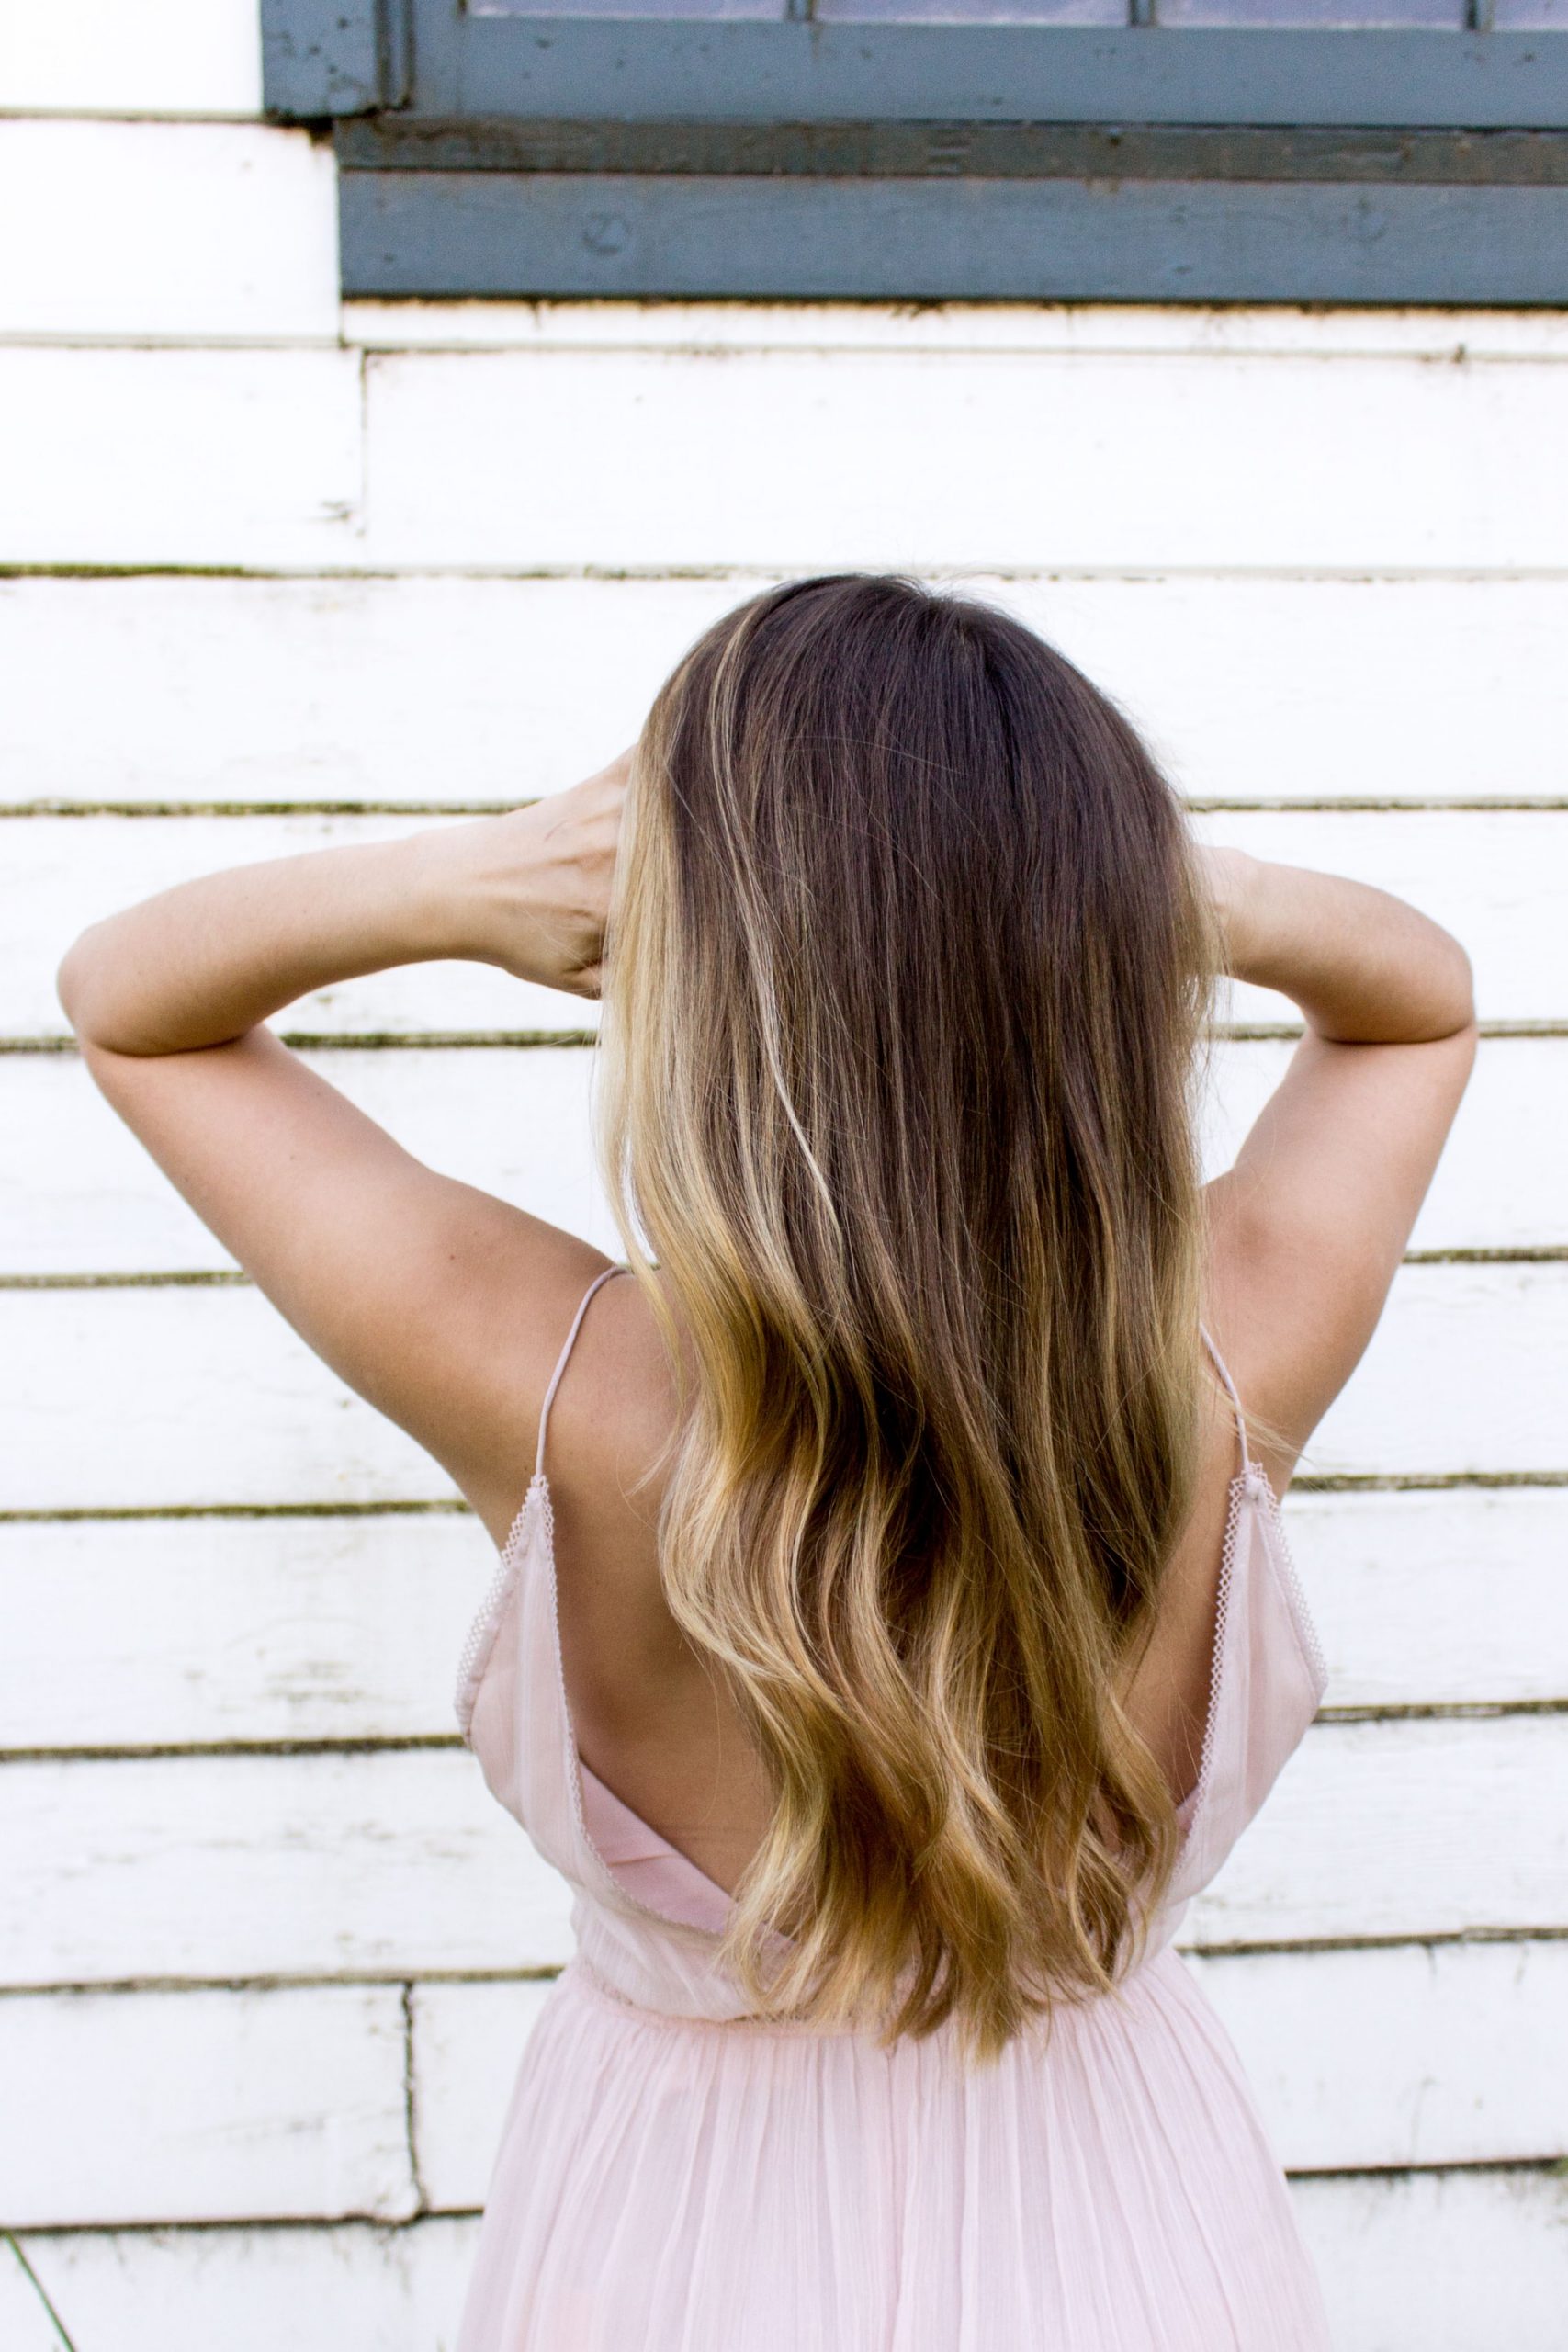 What are the best ways to make hair extensions?